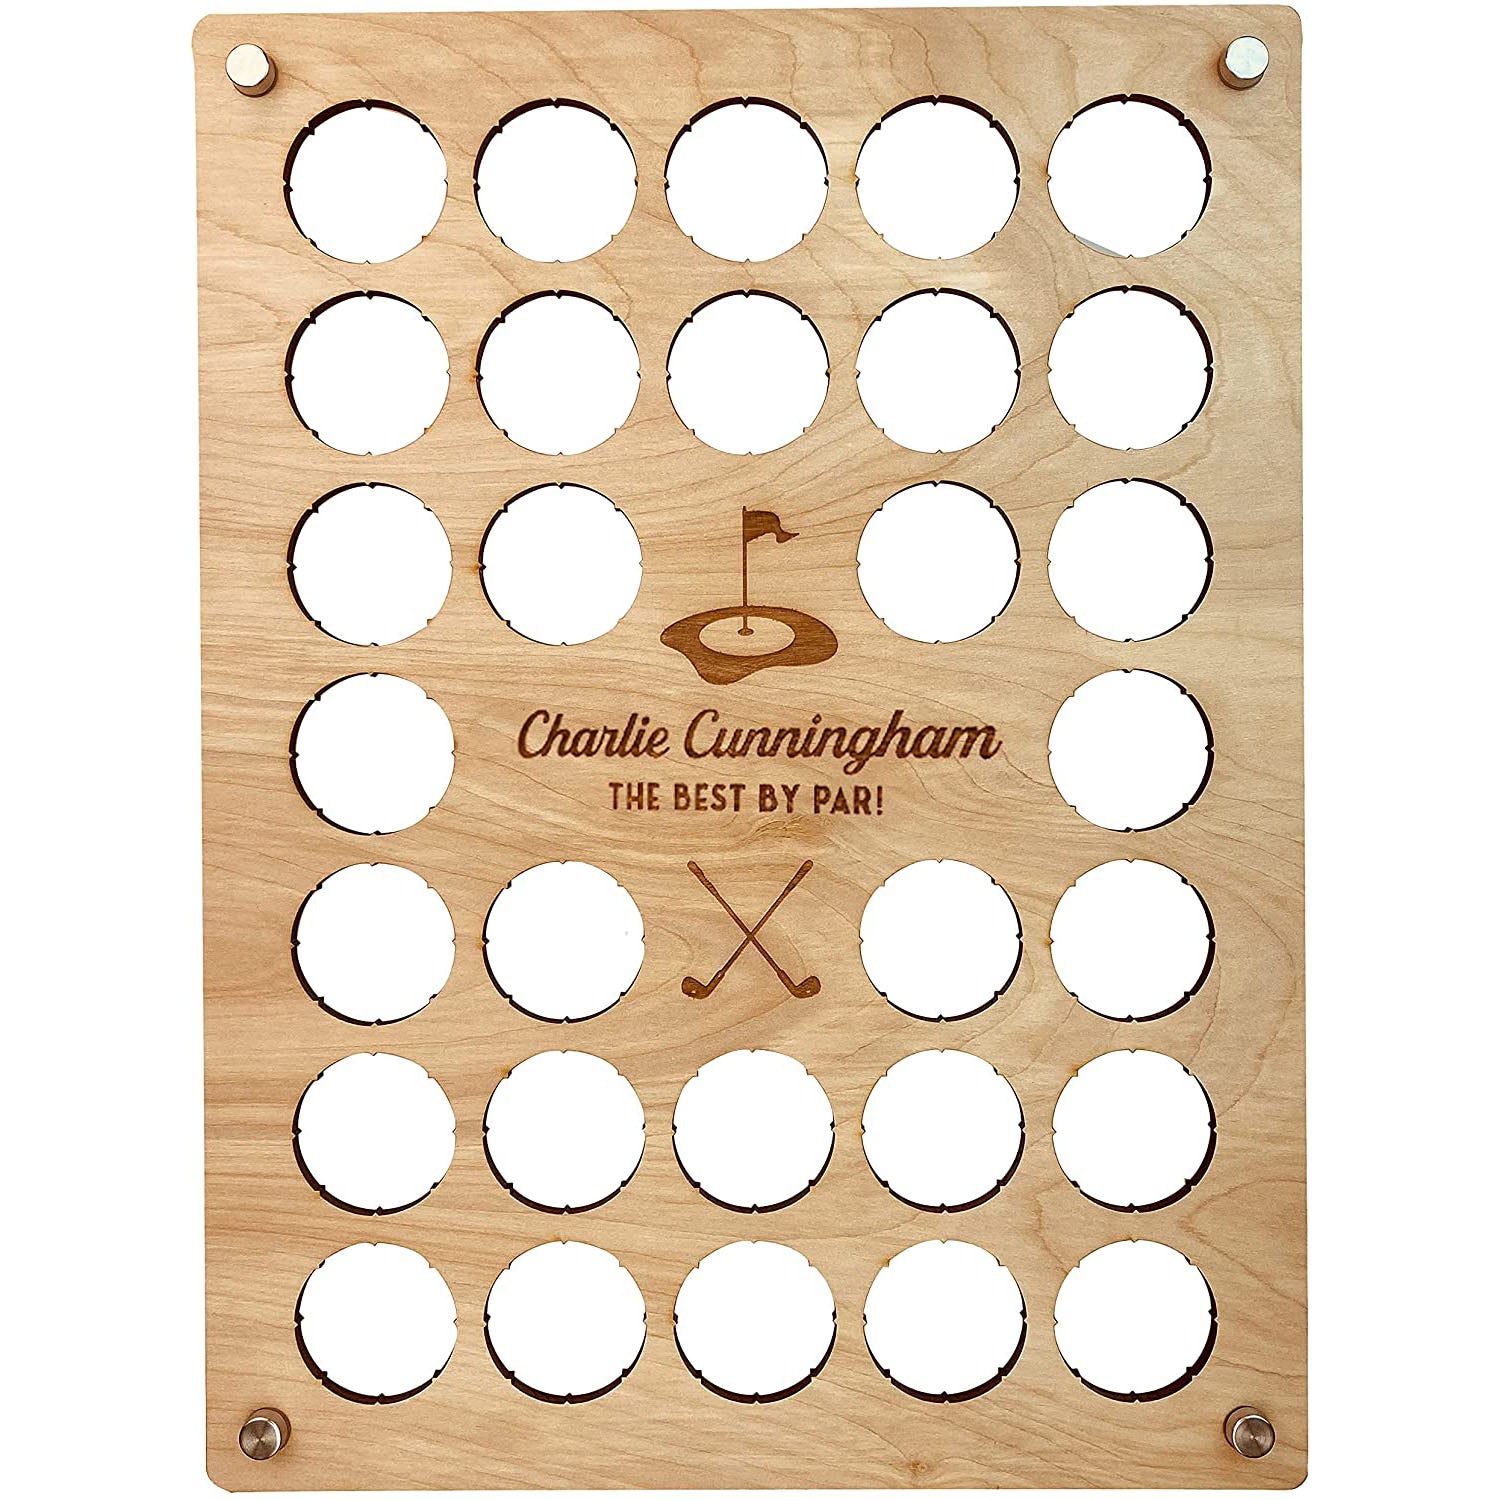 Torched Products mws_apo_generated Default Title #MWS Options 3652230154 Personalized Golf Ball Display Holder- Holds 30 Golf Balls